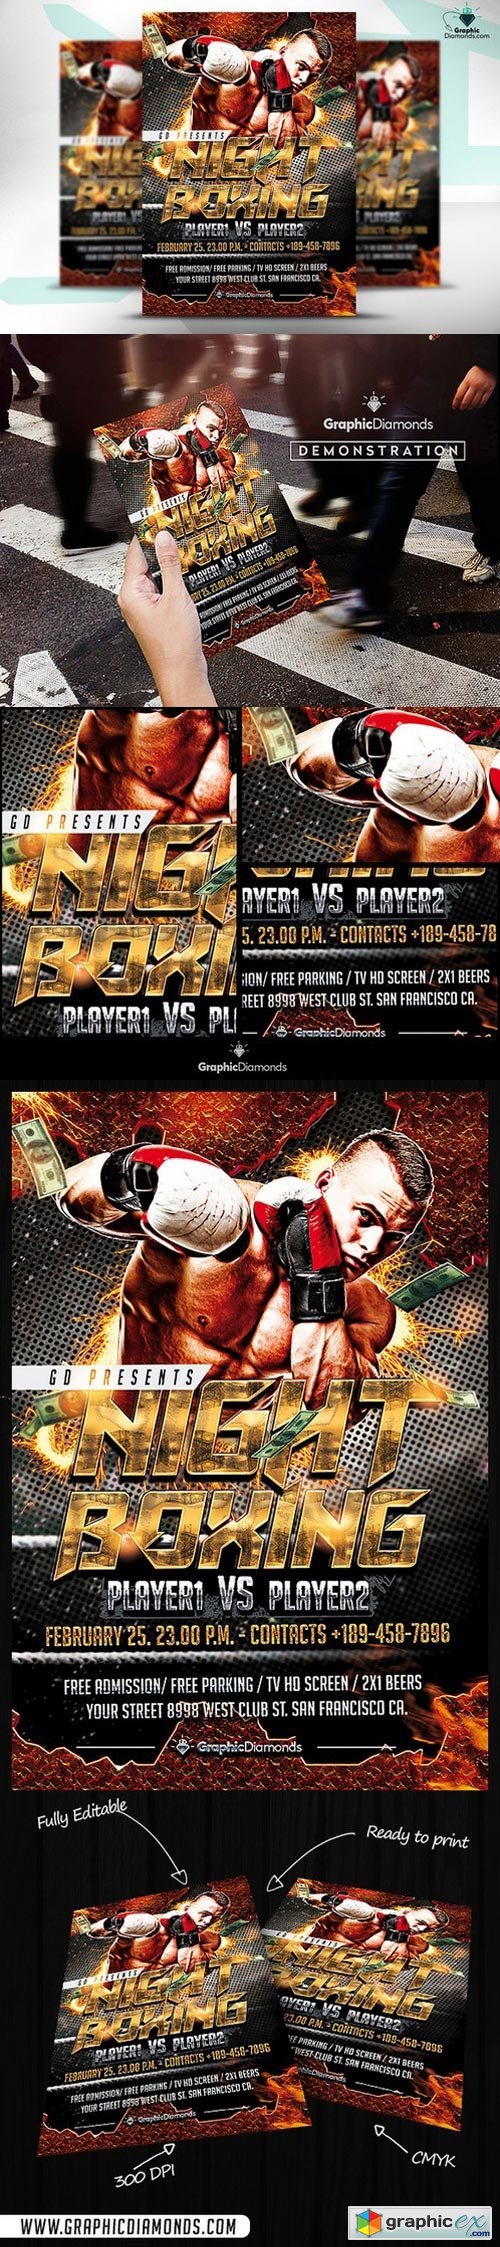 Night Boxing Flyer Template